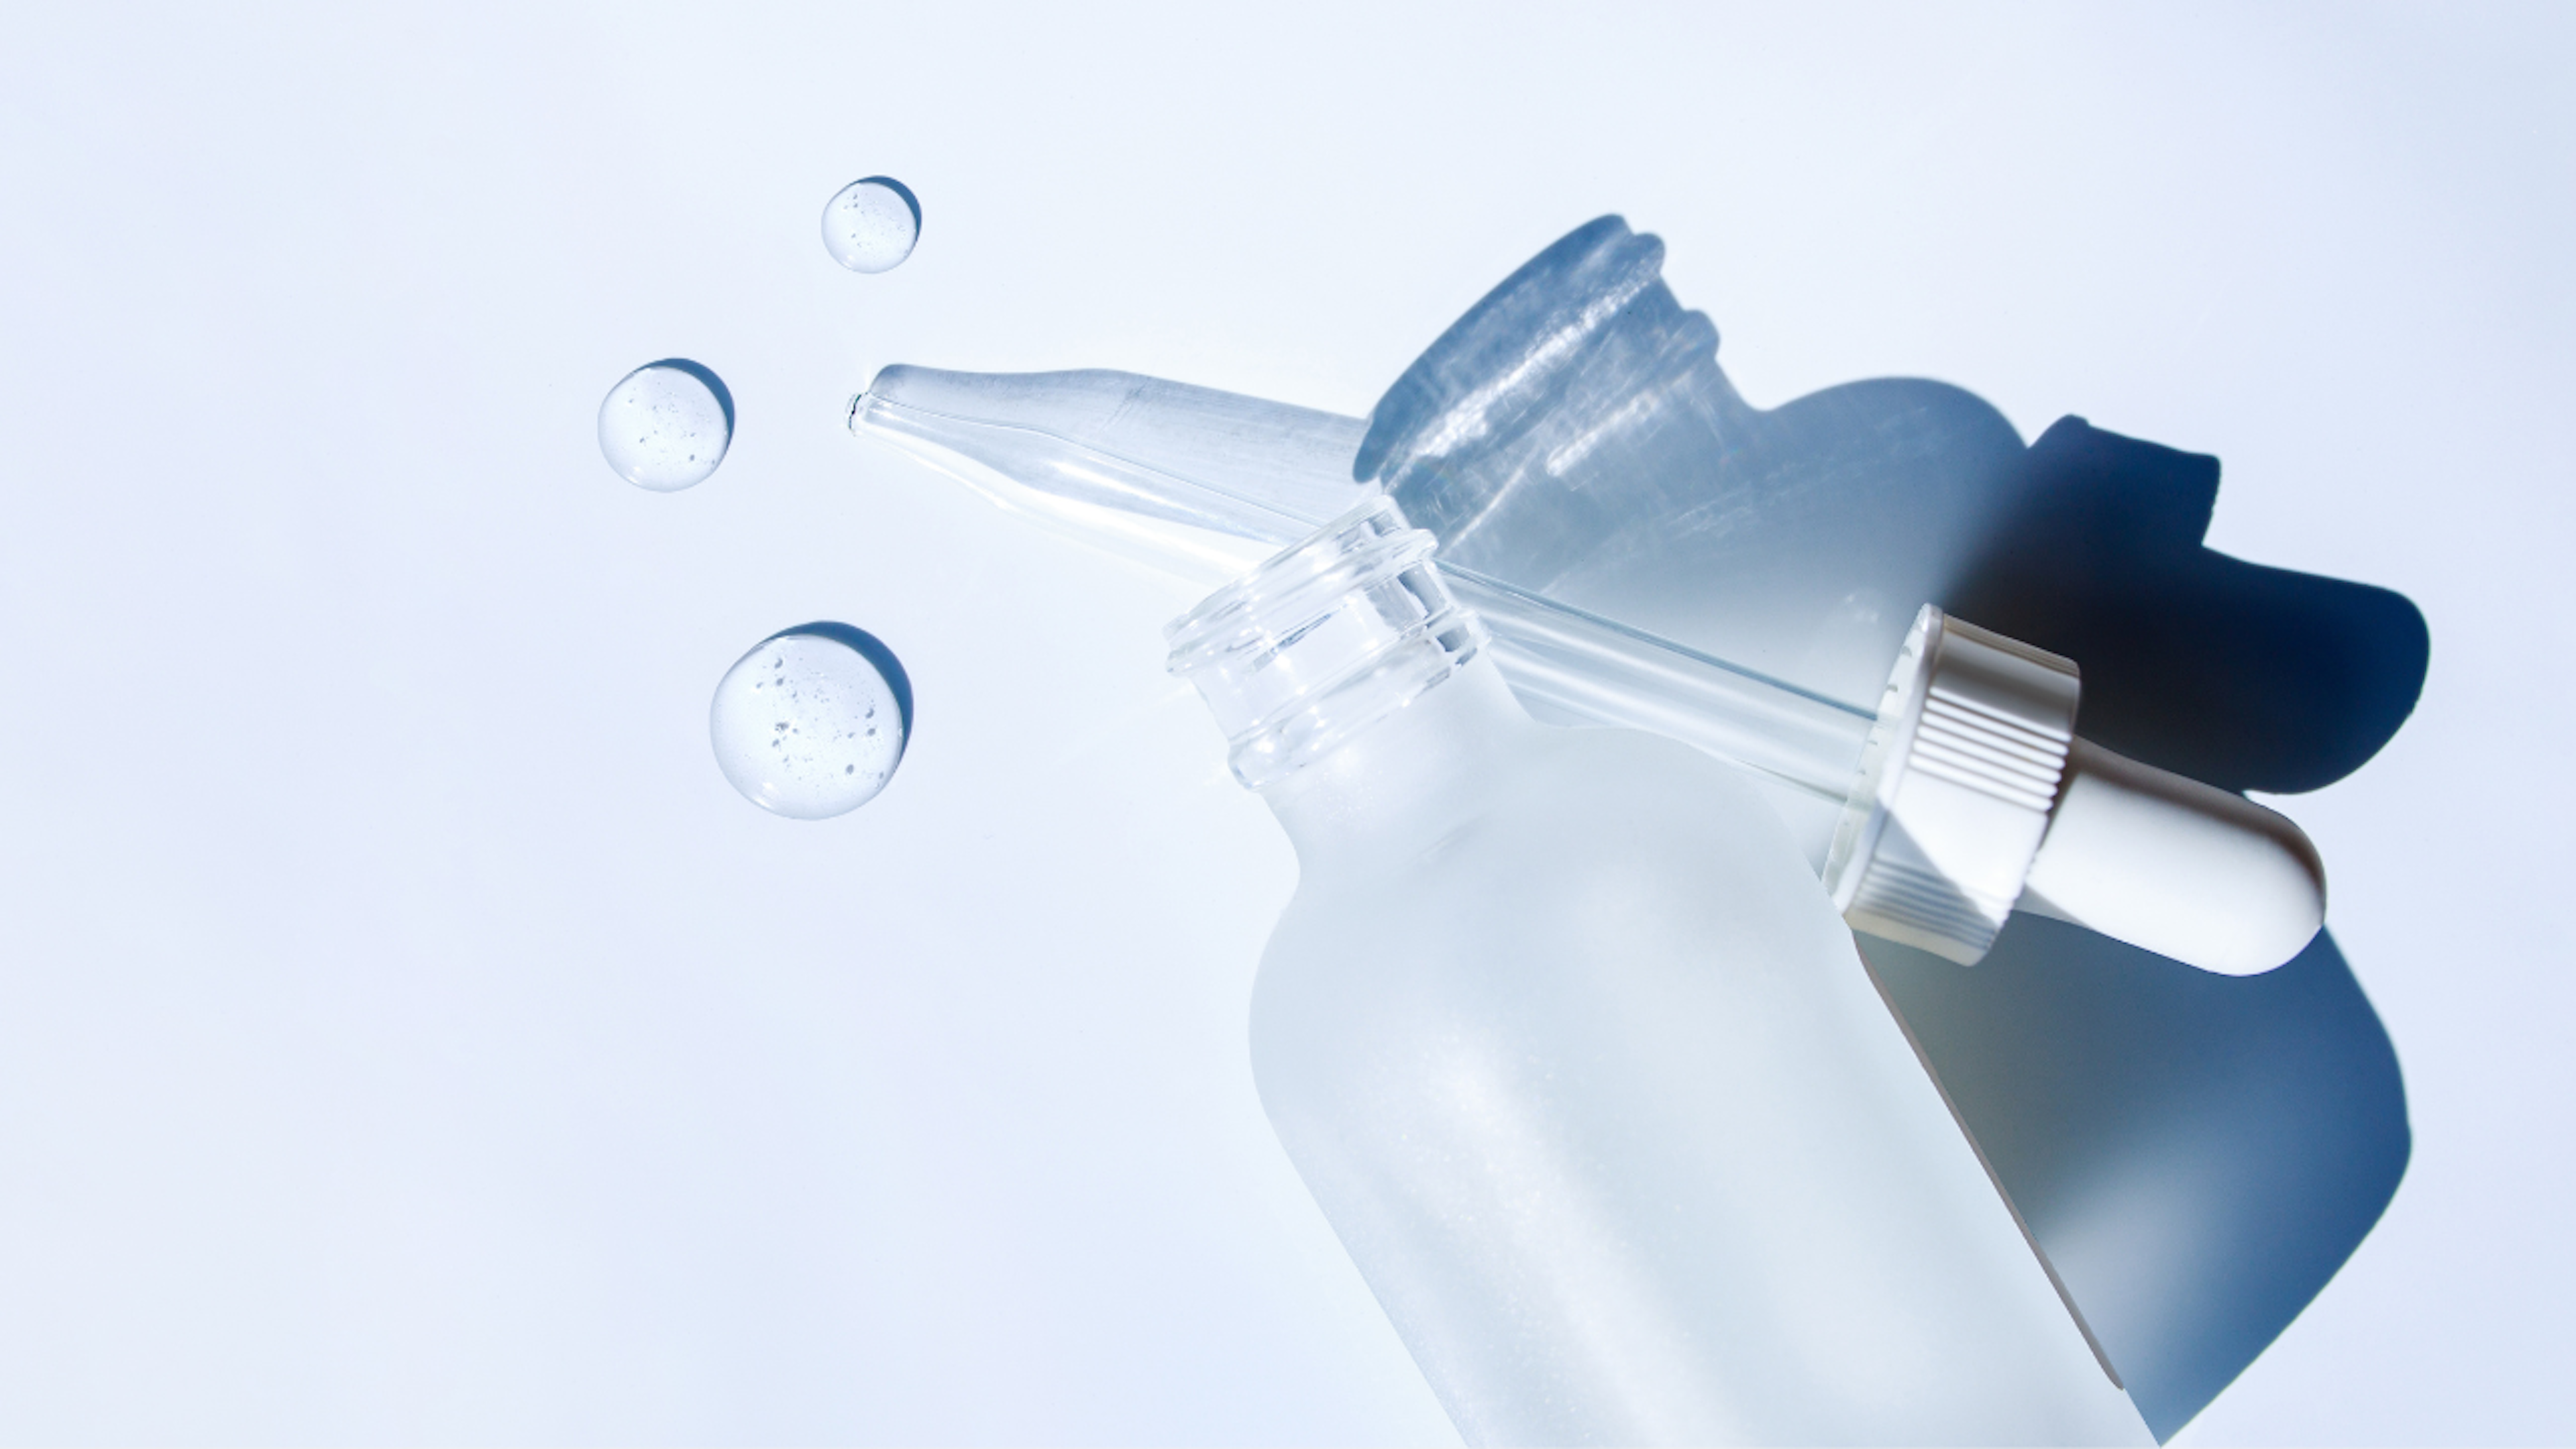 Image of glass serum bottle, dropper and 3 droplets